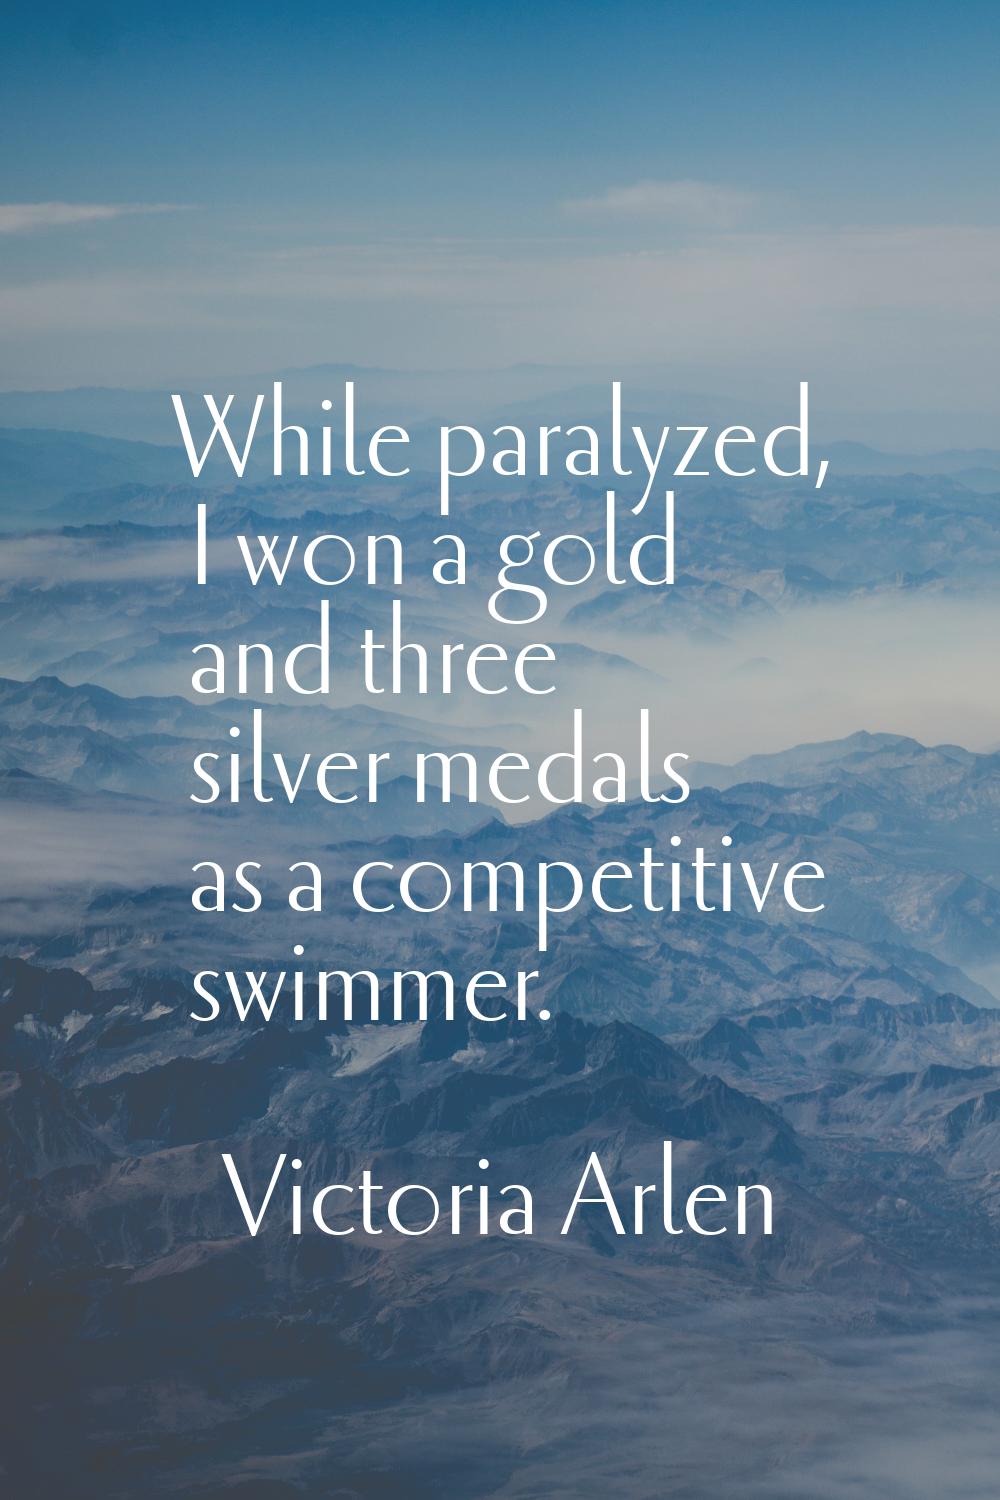 While paralyzed, I won a gold and three silver medals as a competitive swimmer.